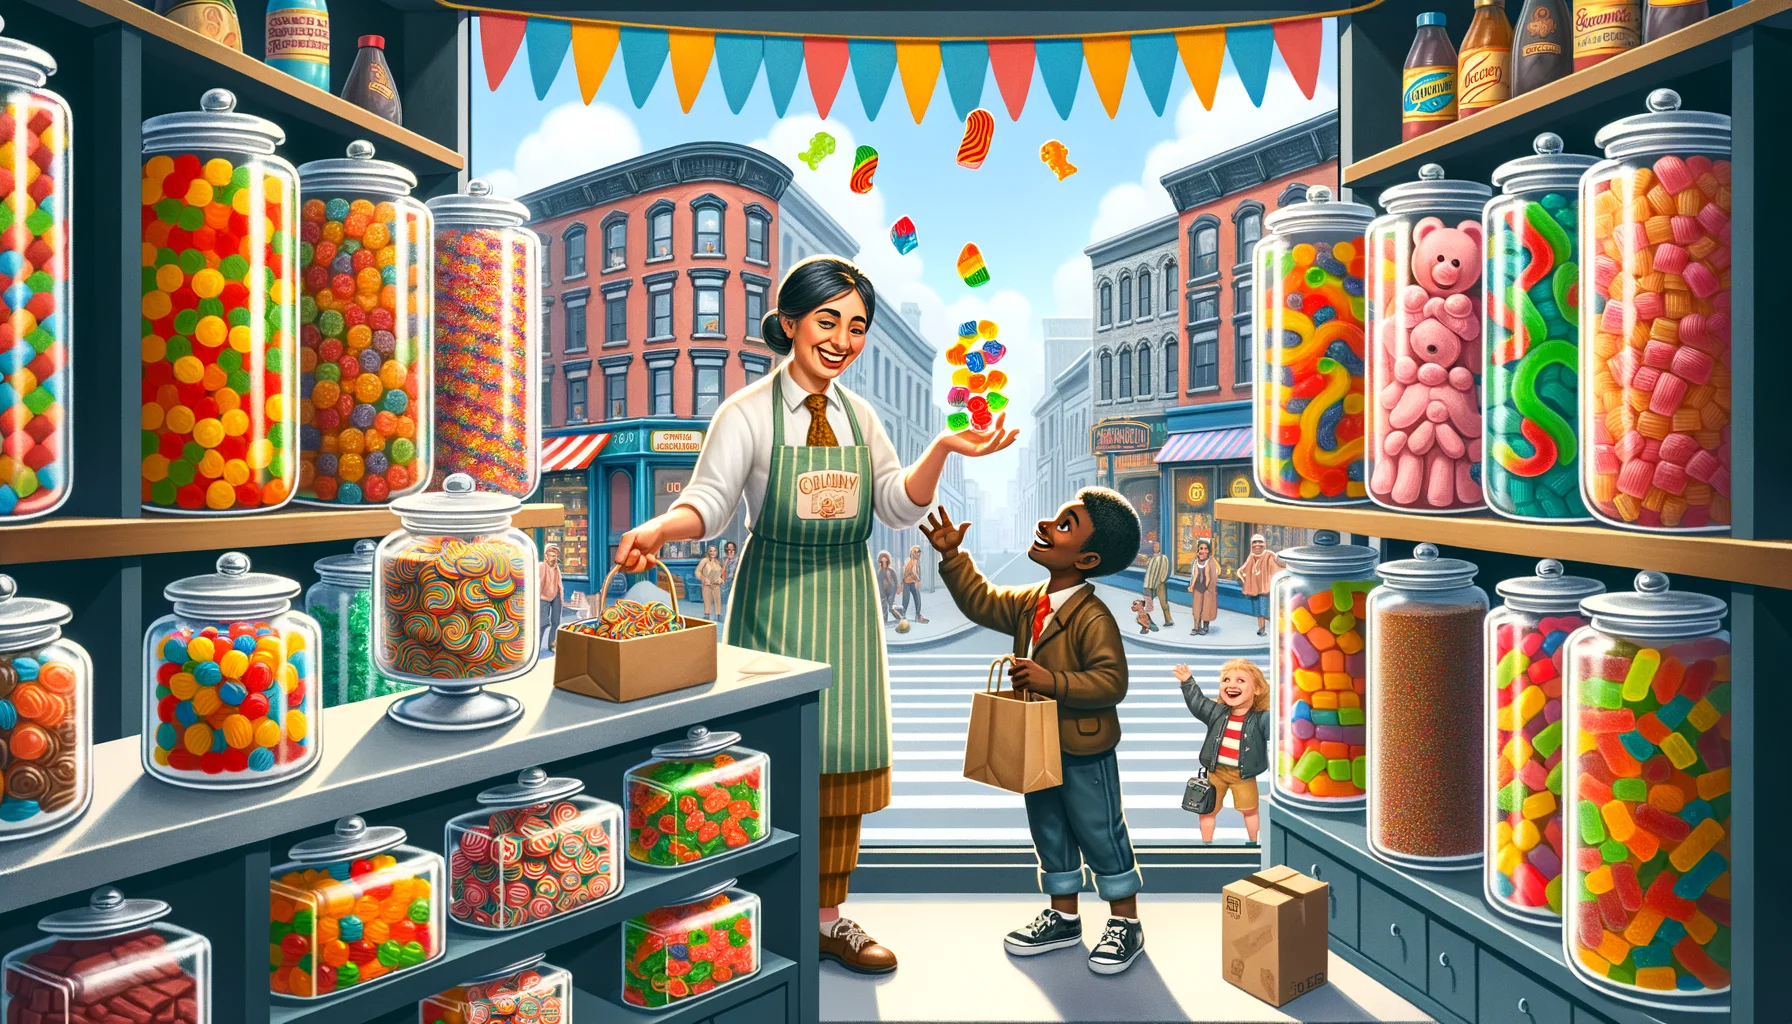 Imagine a hilariously perfect scenario for enjoying gummy candies. This image depicts a playful candy store in the heart of a vibrant city. The shop has towering glass jars of colorful gummy candies on the shelves, arranged in every conceivable shape from bears to dinosaurs. Behind the counter, a jovial South Asian female shopkeeper, wearing an apron and a big smile, is handing over a bag of jumbo mixed gummy candies to a delighted Black little boy. Outside, a street performer, a Caucasian male, is juggling gummy candies to the delight of a small crowd.